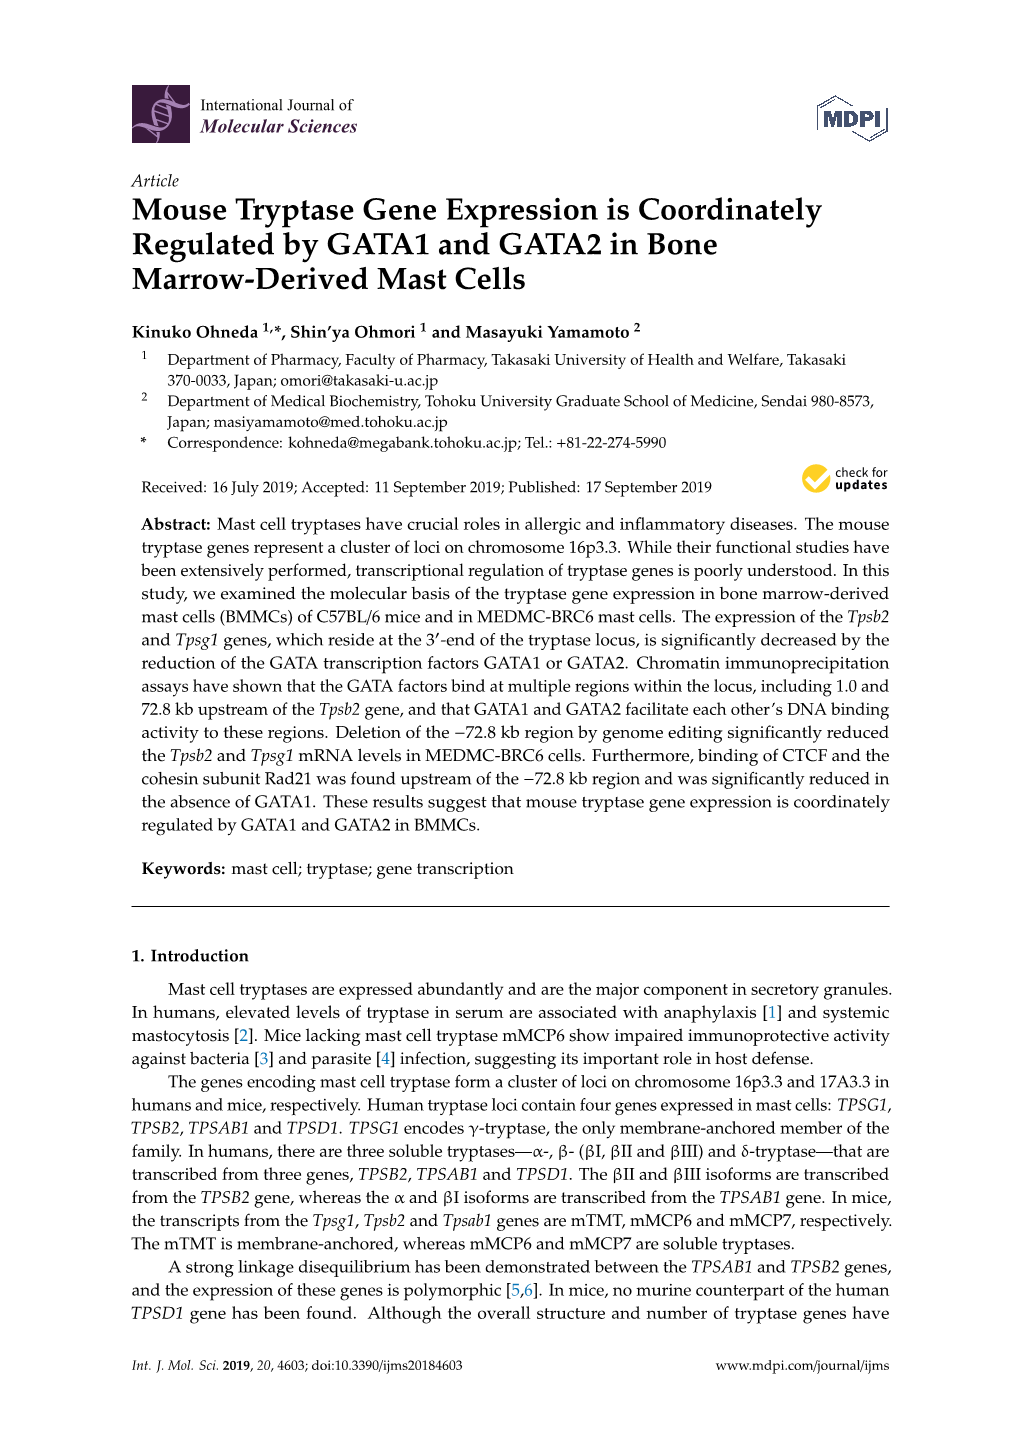 Mouse Tryptase Gene Expression Is Coordinately Regulated by GATA1 and GATA2 in Bone Marrow-Derived Mast Cells